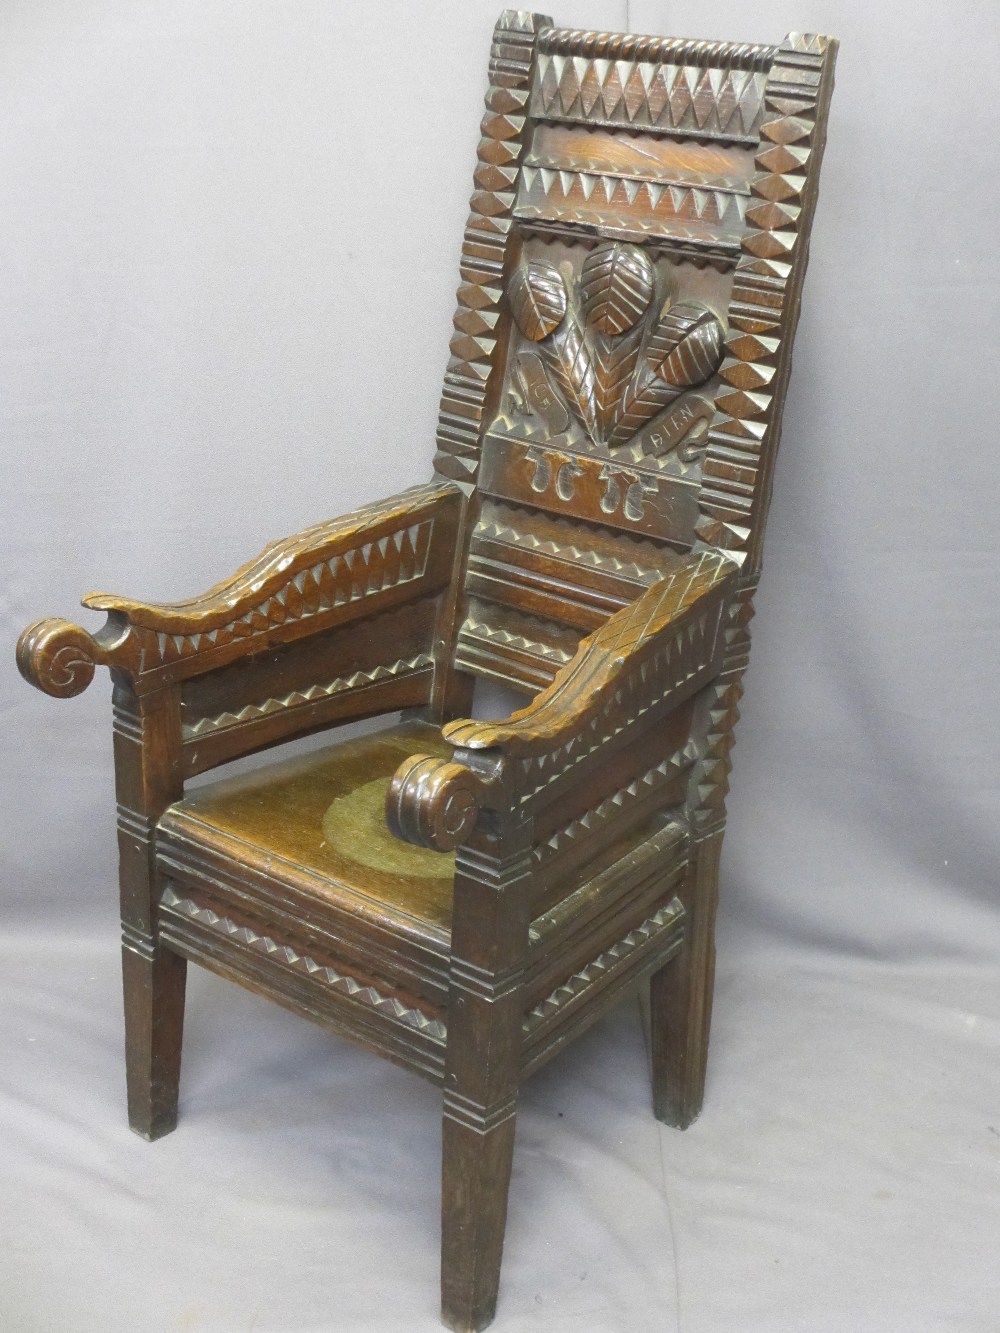 HEAVILY CARVED WELSH EISTEDDFOD TYPE CHAIR, three feathers and 'Ich Dien' carved to the back - Image 3 of 4